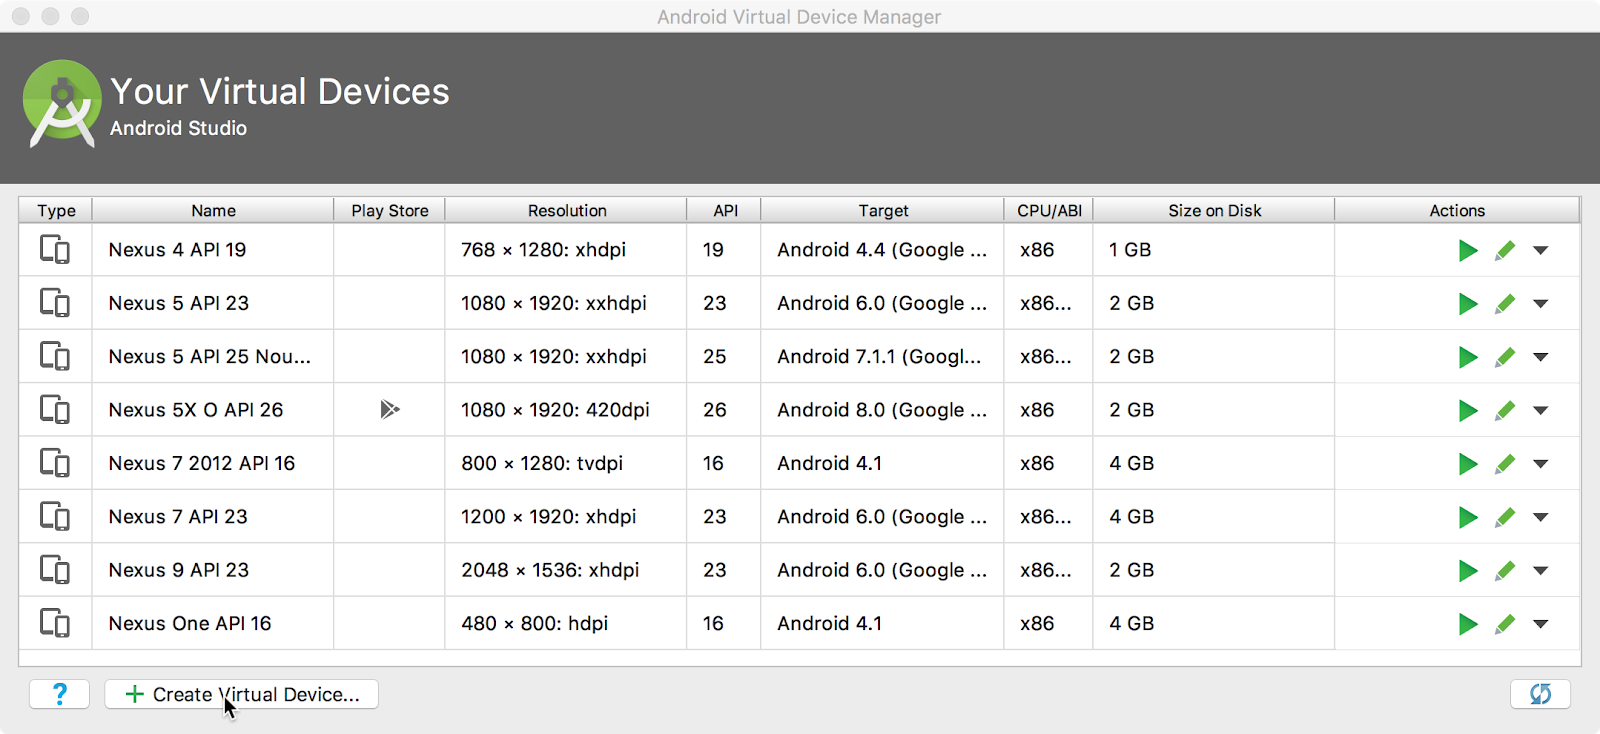 The Android Virtual Device (AVD) Manager showing a list of virtual devices already created